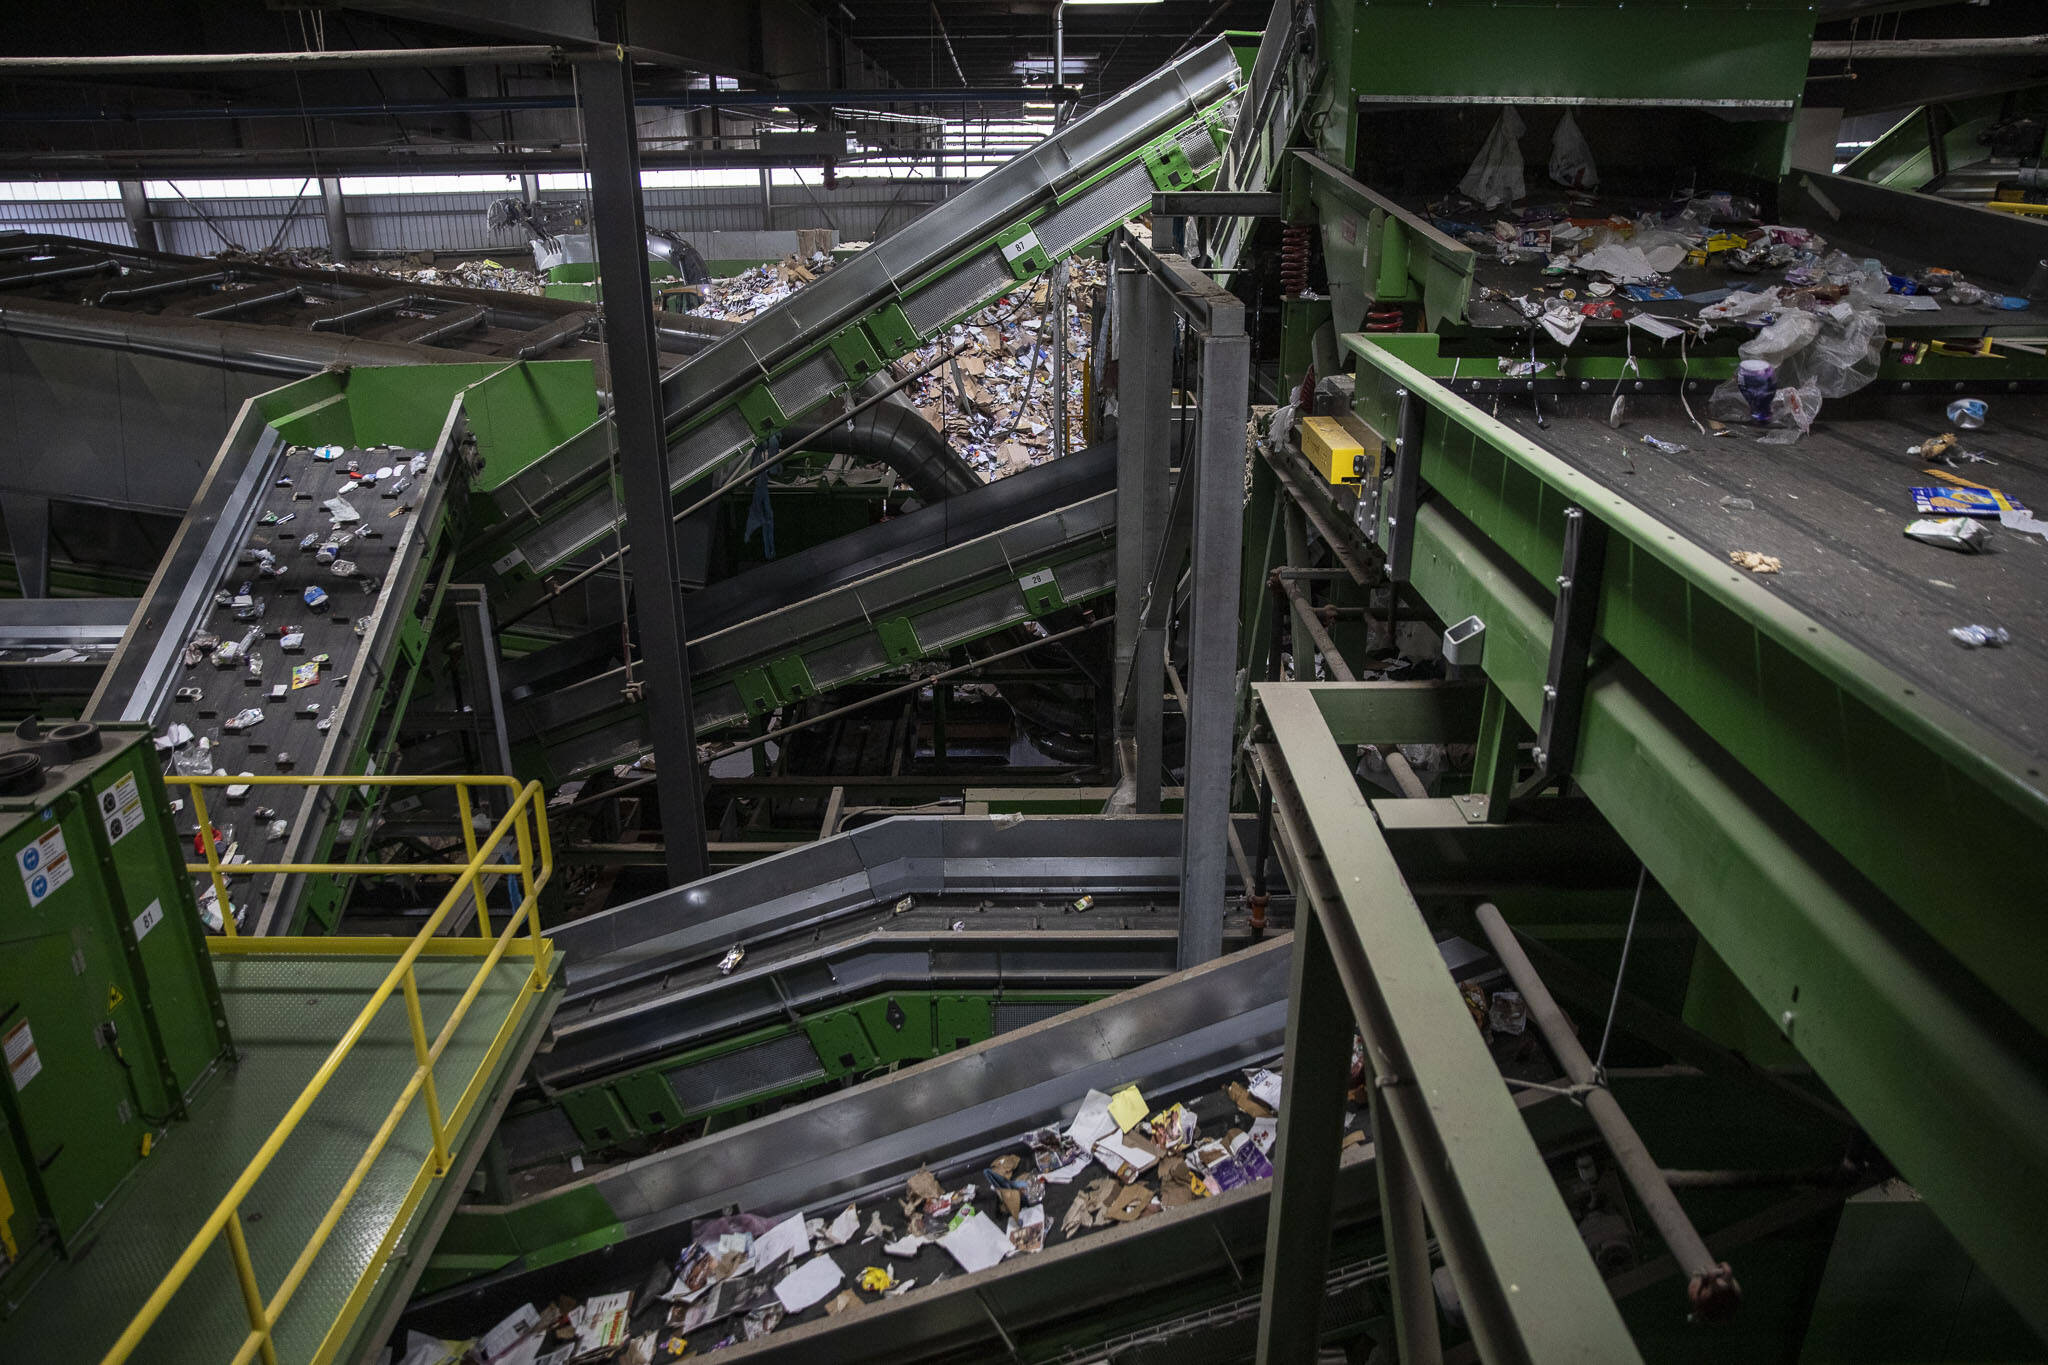 Items are sorted for recycling inside the Waste Management Cascade Recycling Center in Woodinville, Washington on Wednesday, Nov. 1, 2023. (Annie Barker / The Herald)